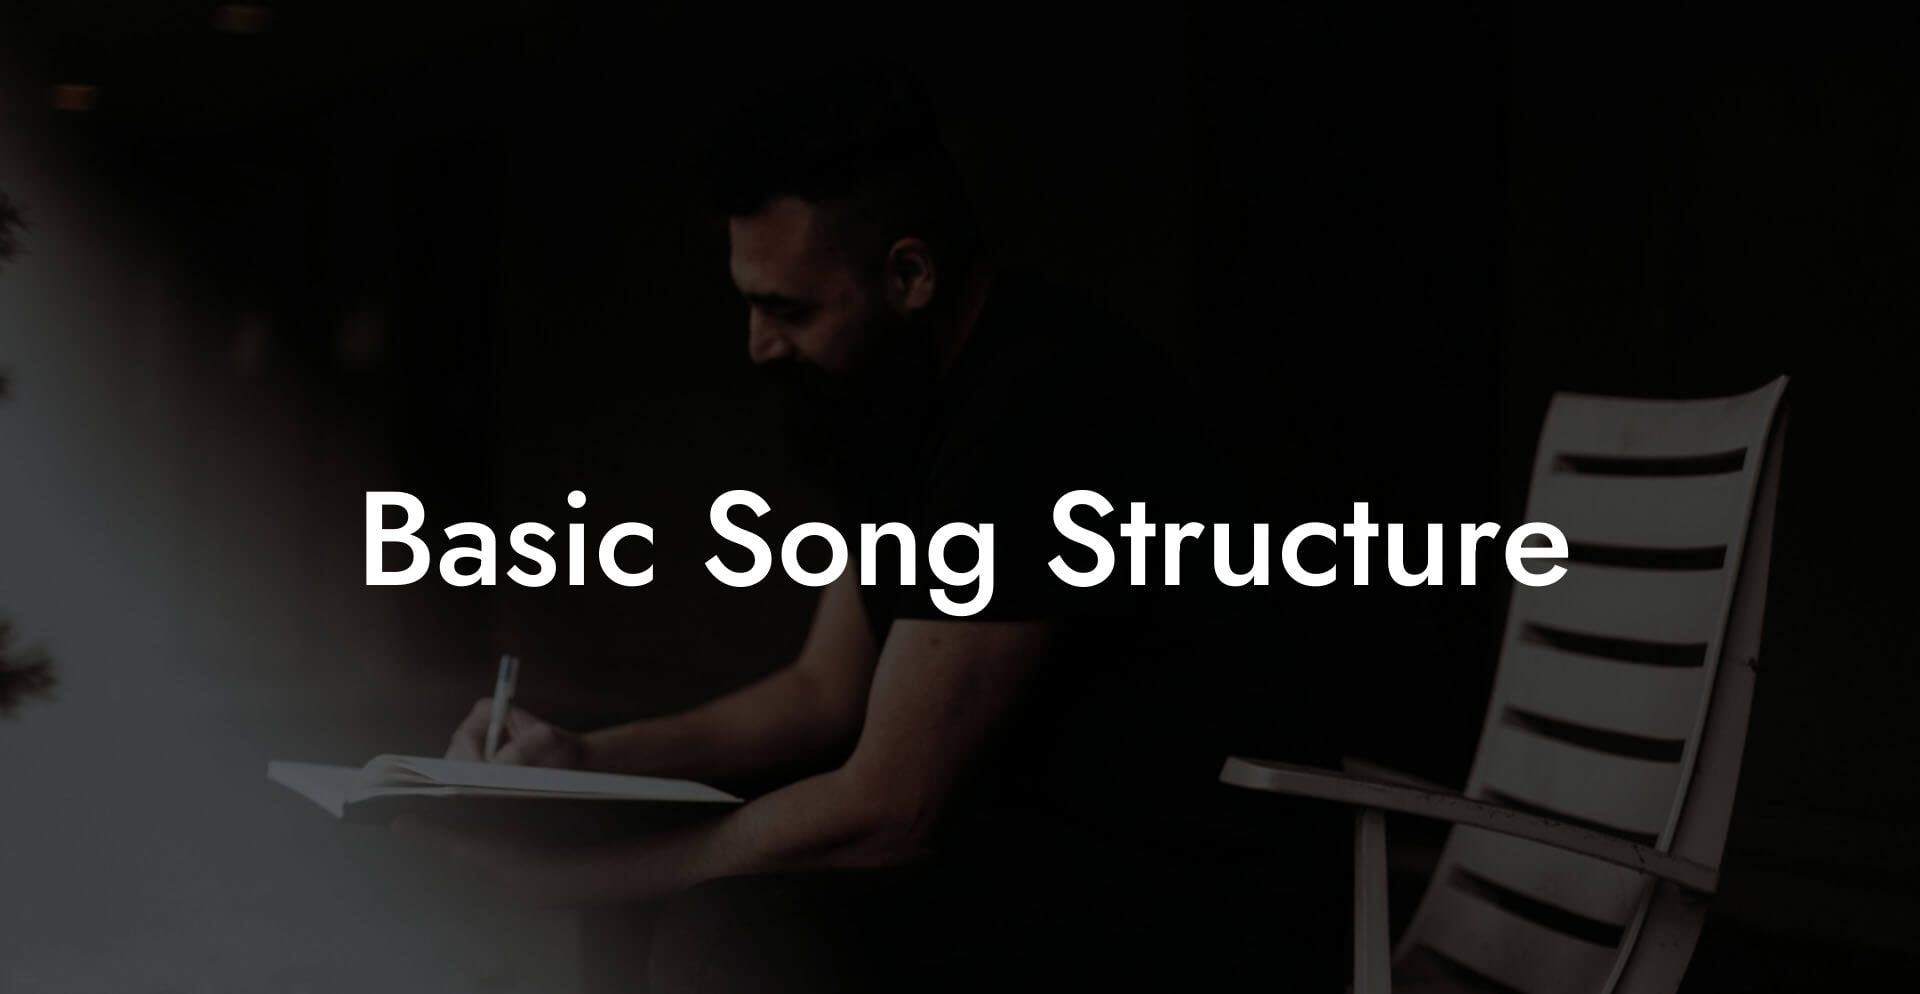 basic song structure lyric assistant